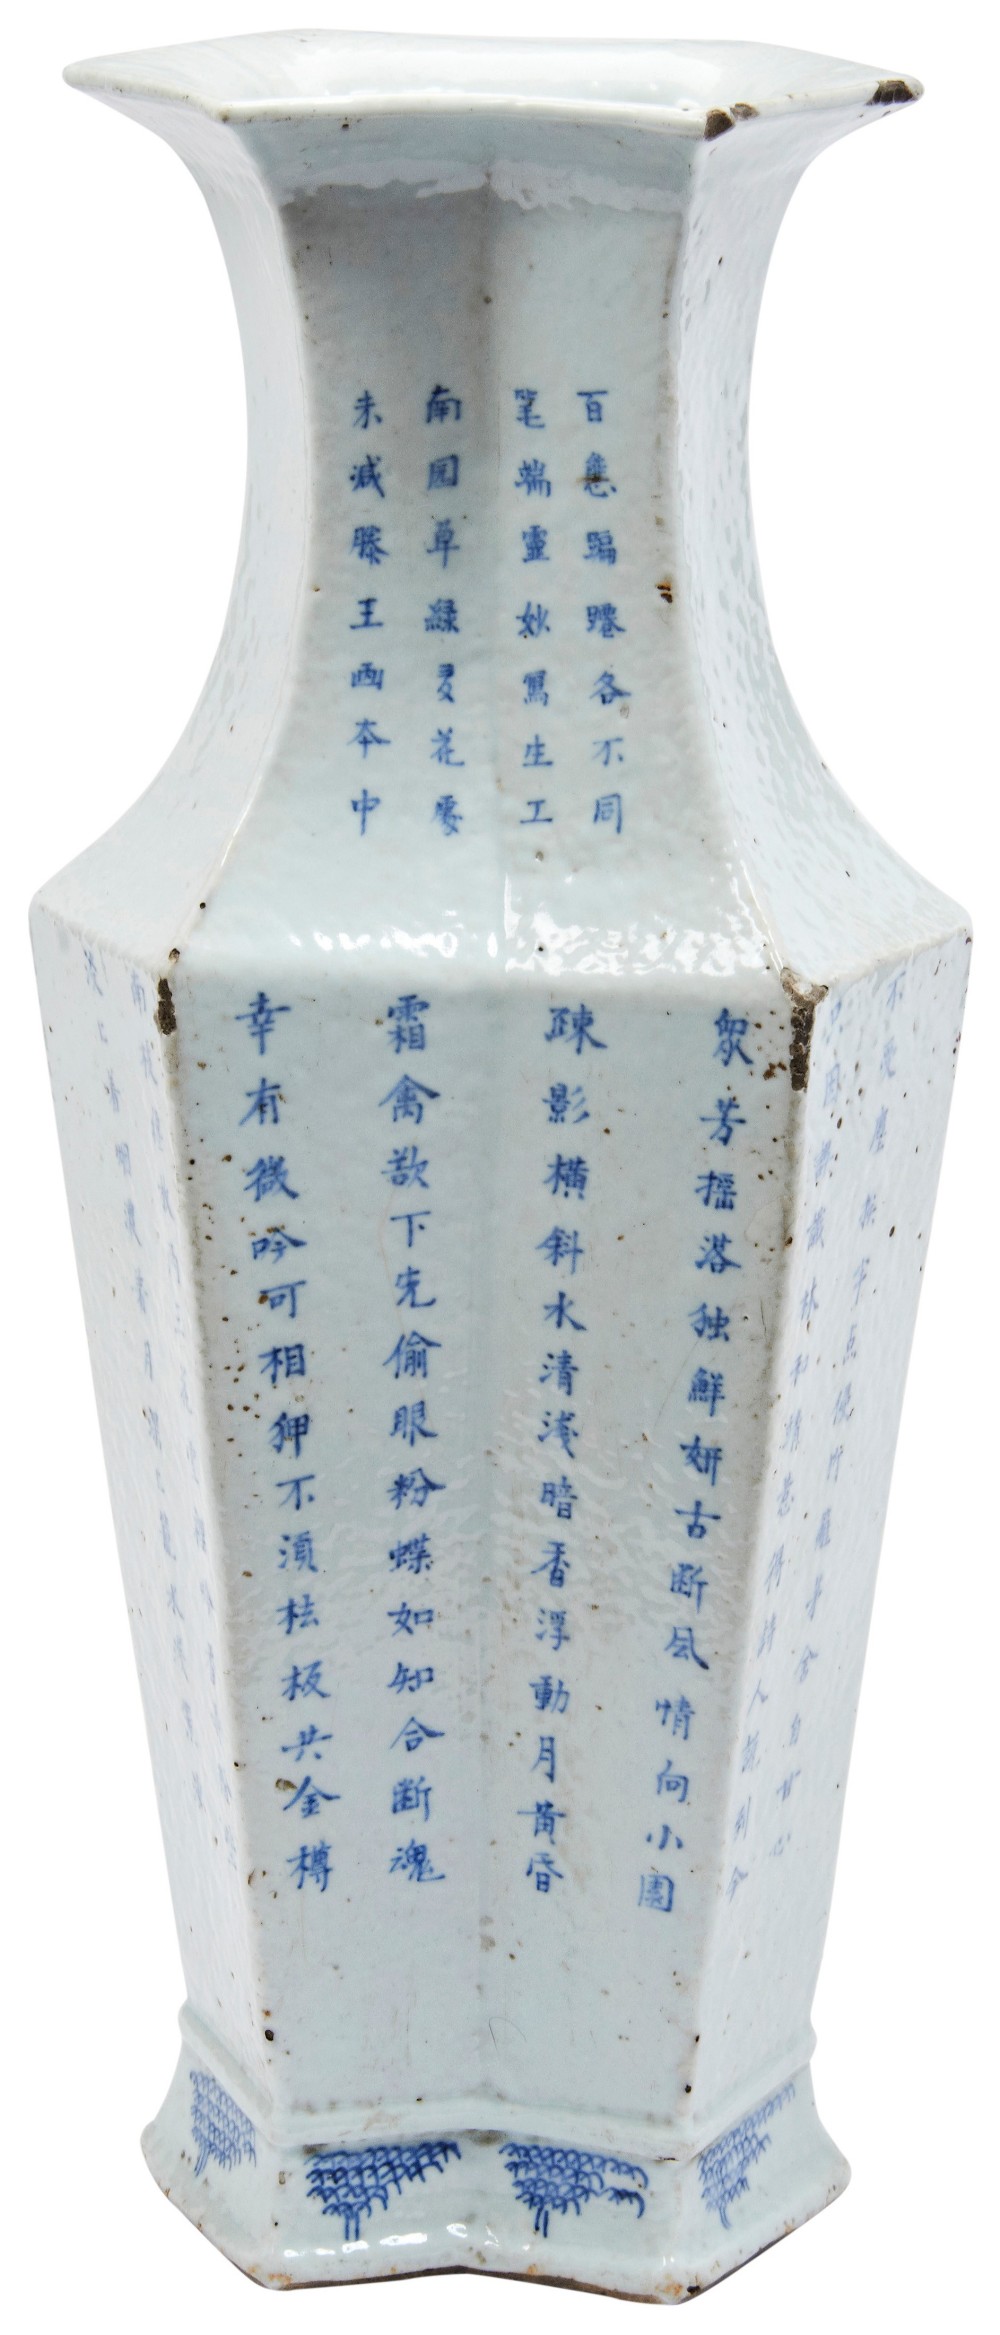 RARE BLUE & WHITE 'DOUBLE-SQUARE' VASE QING DYNASTY, 18TH CENTURY the shaped angular sides painted - Image 2 of 2